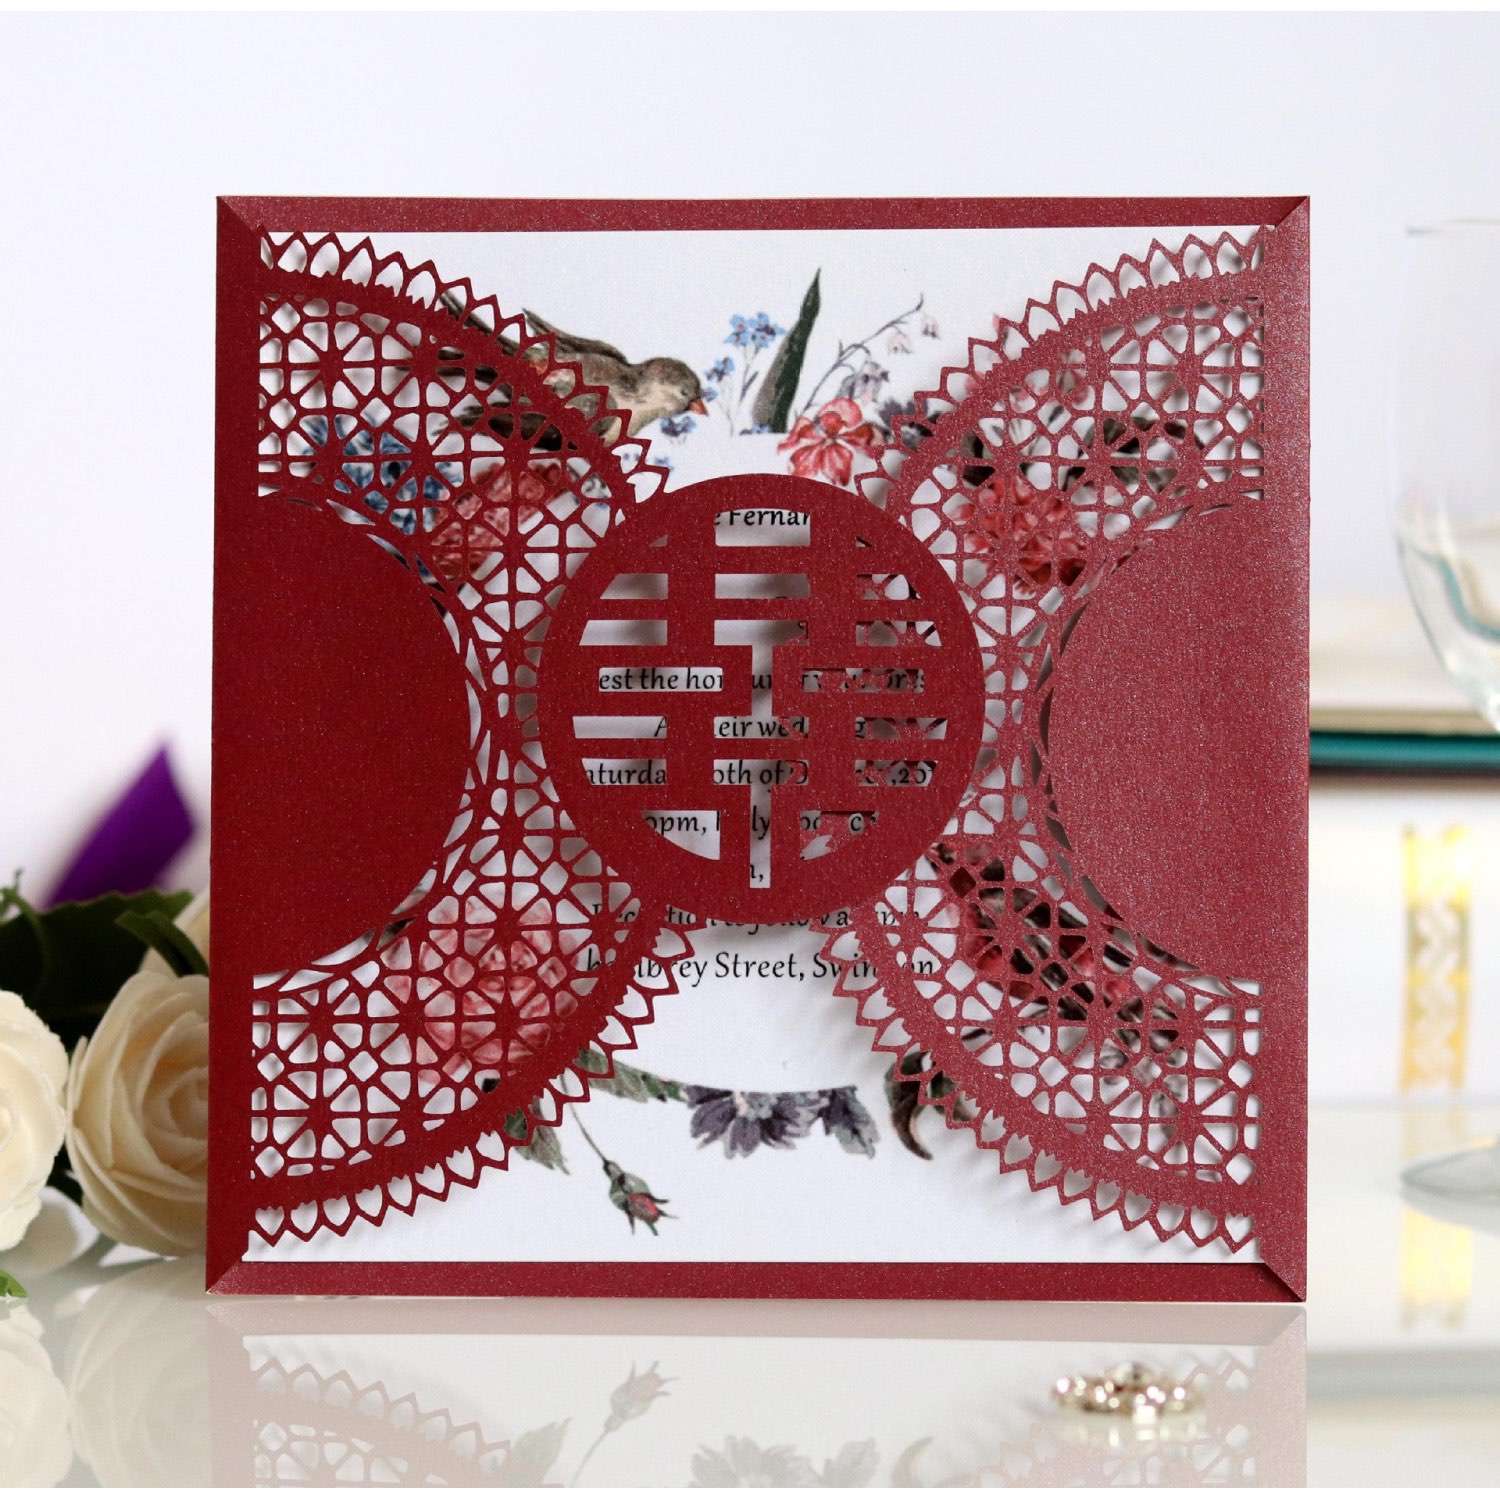 Chinese Style Marriage Invitation Card Wedding Card Design Laser Cut 